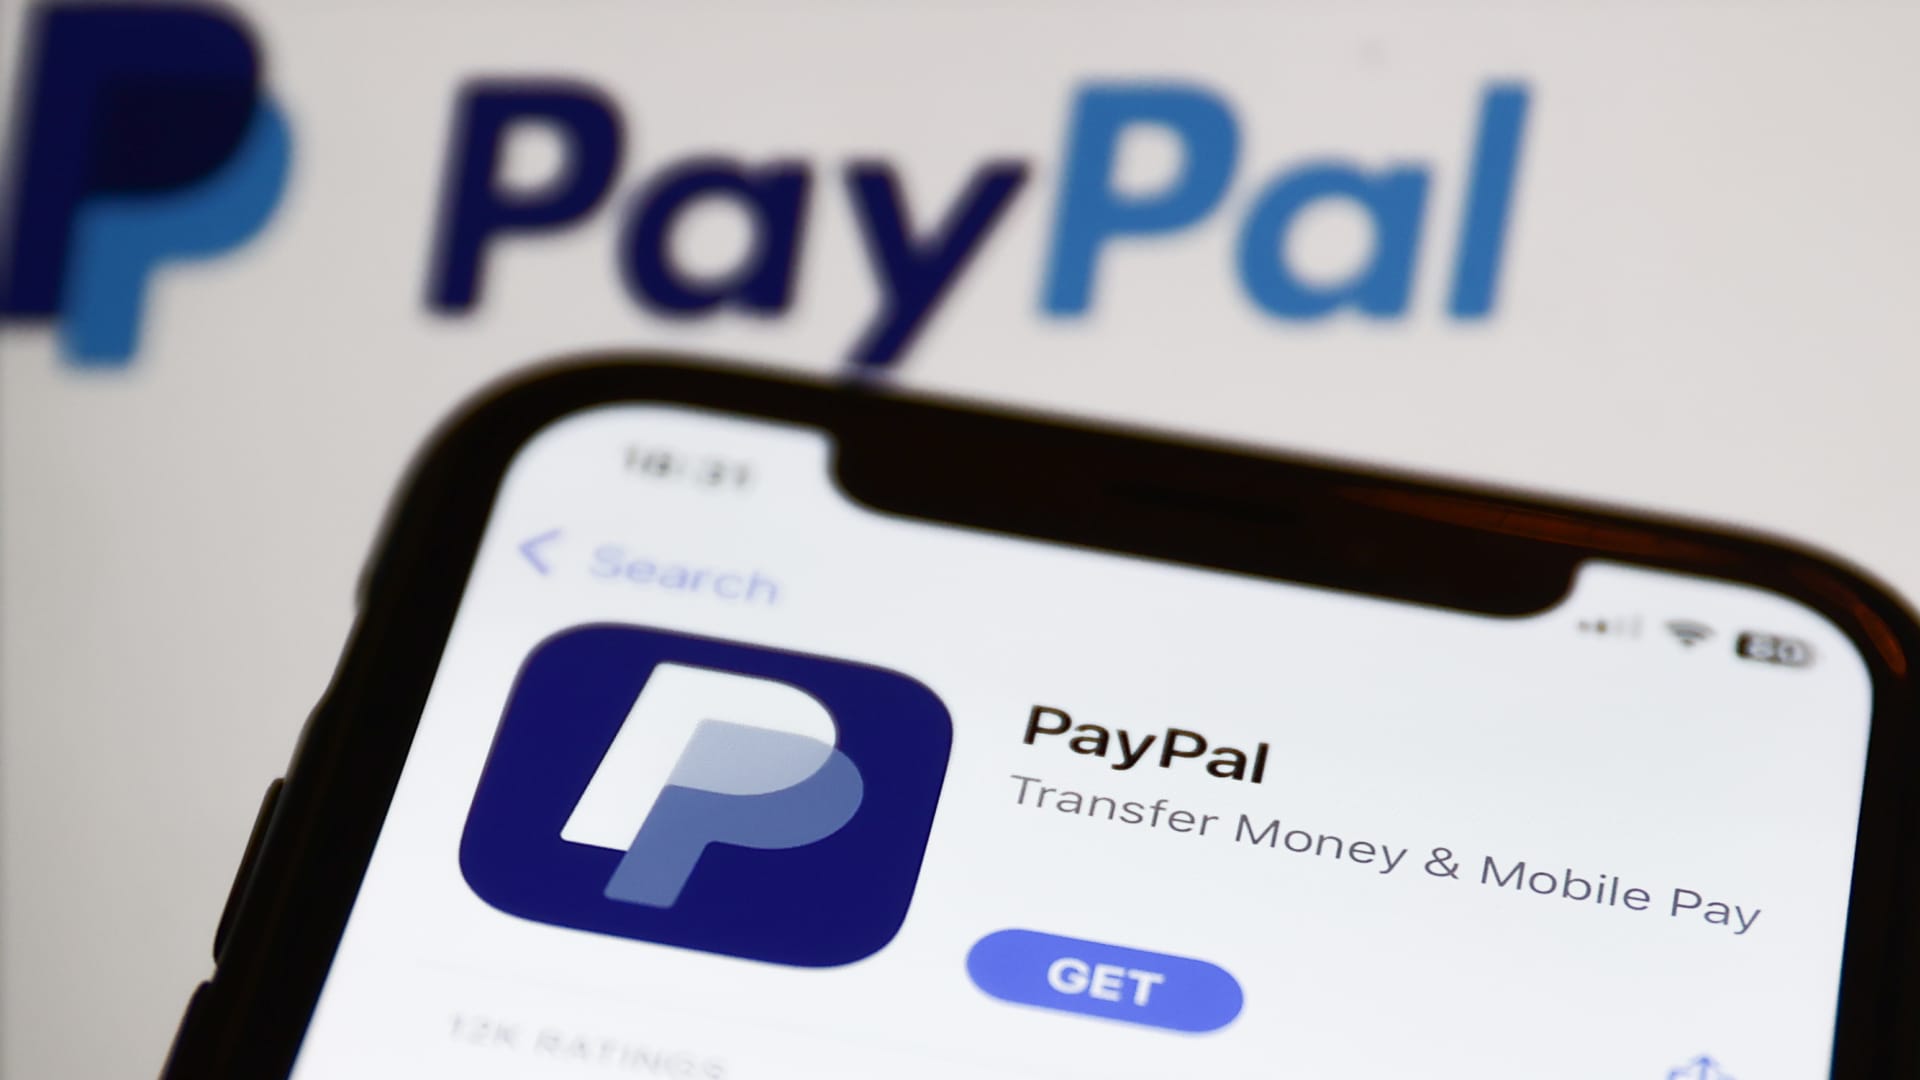 Intuit’s Alex Chriss named new PayPal CEO